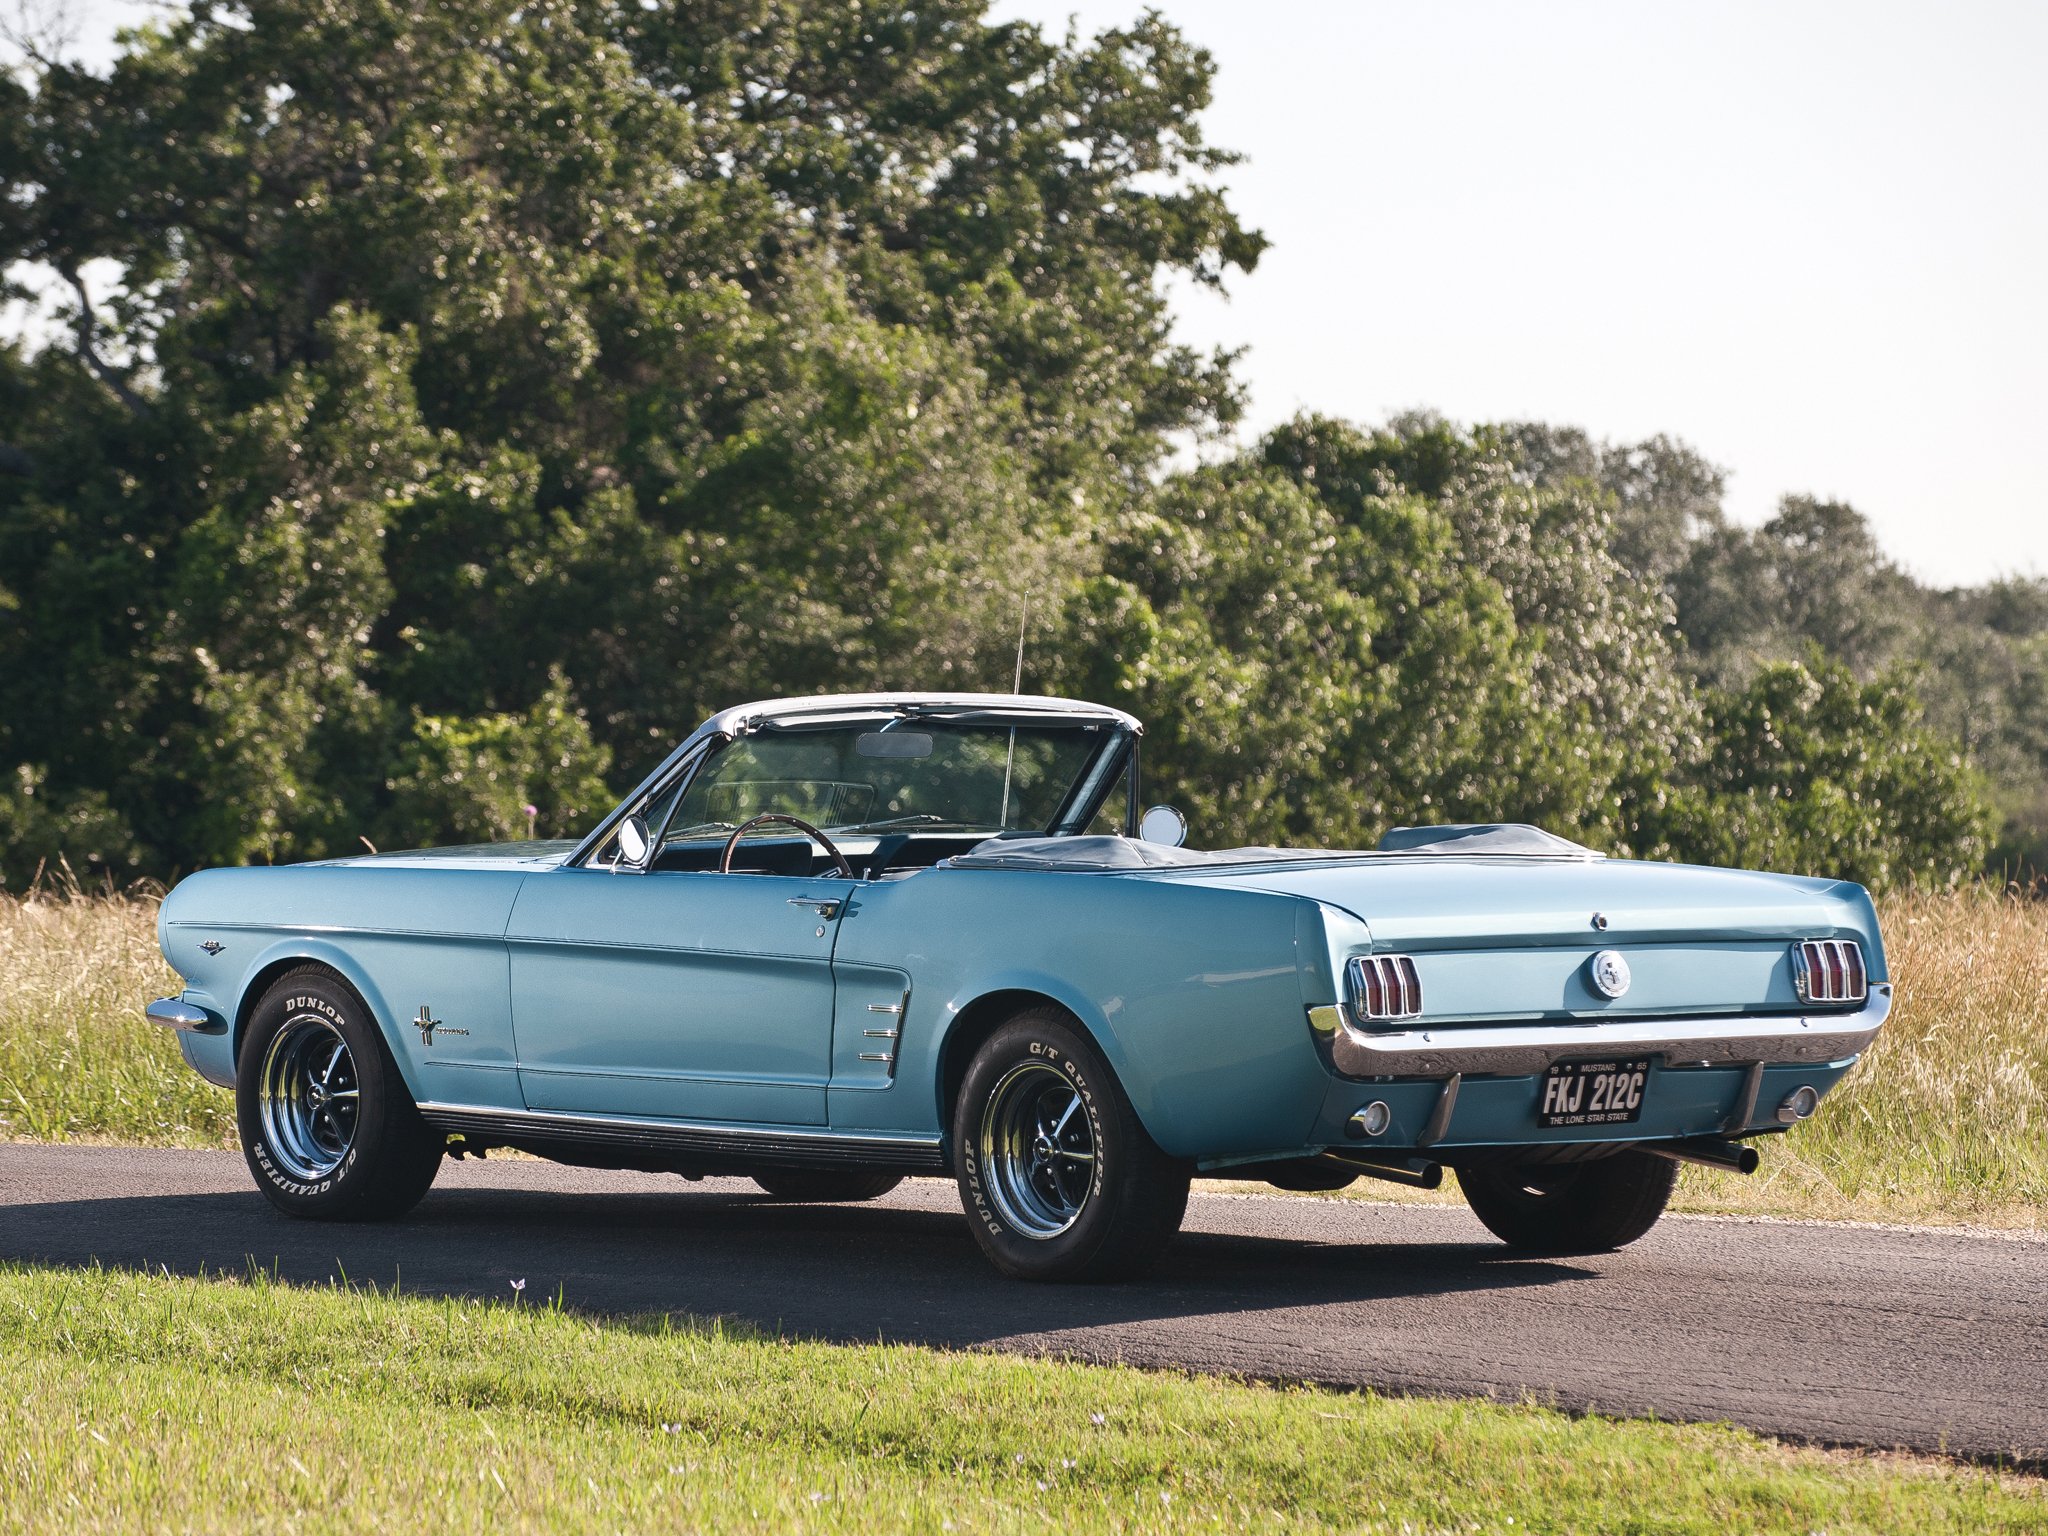  Ford Mustang Convertible muscle classic rd wallpaper background